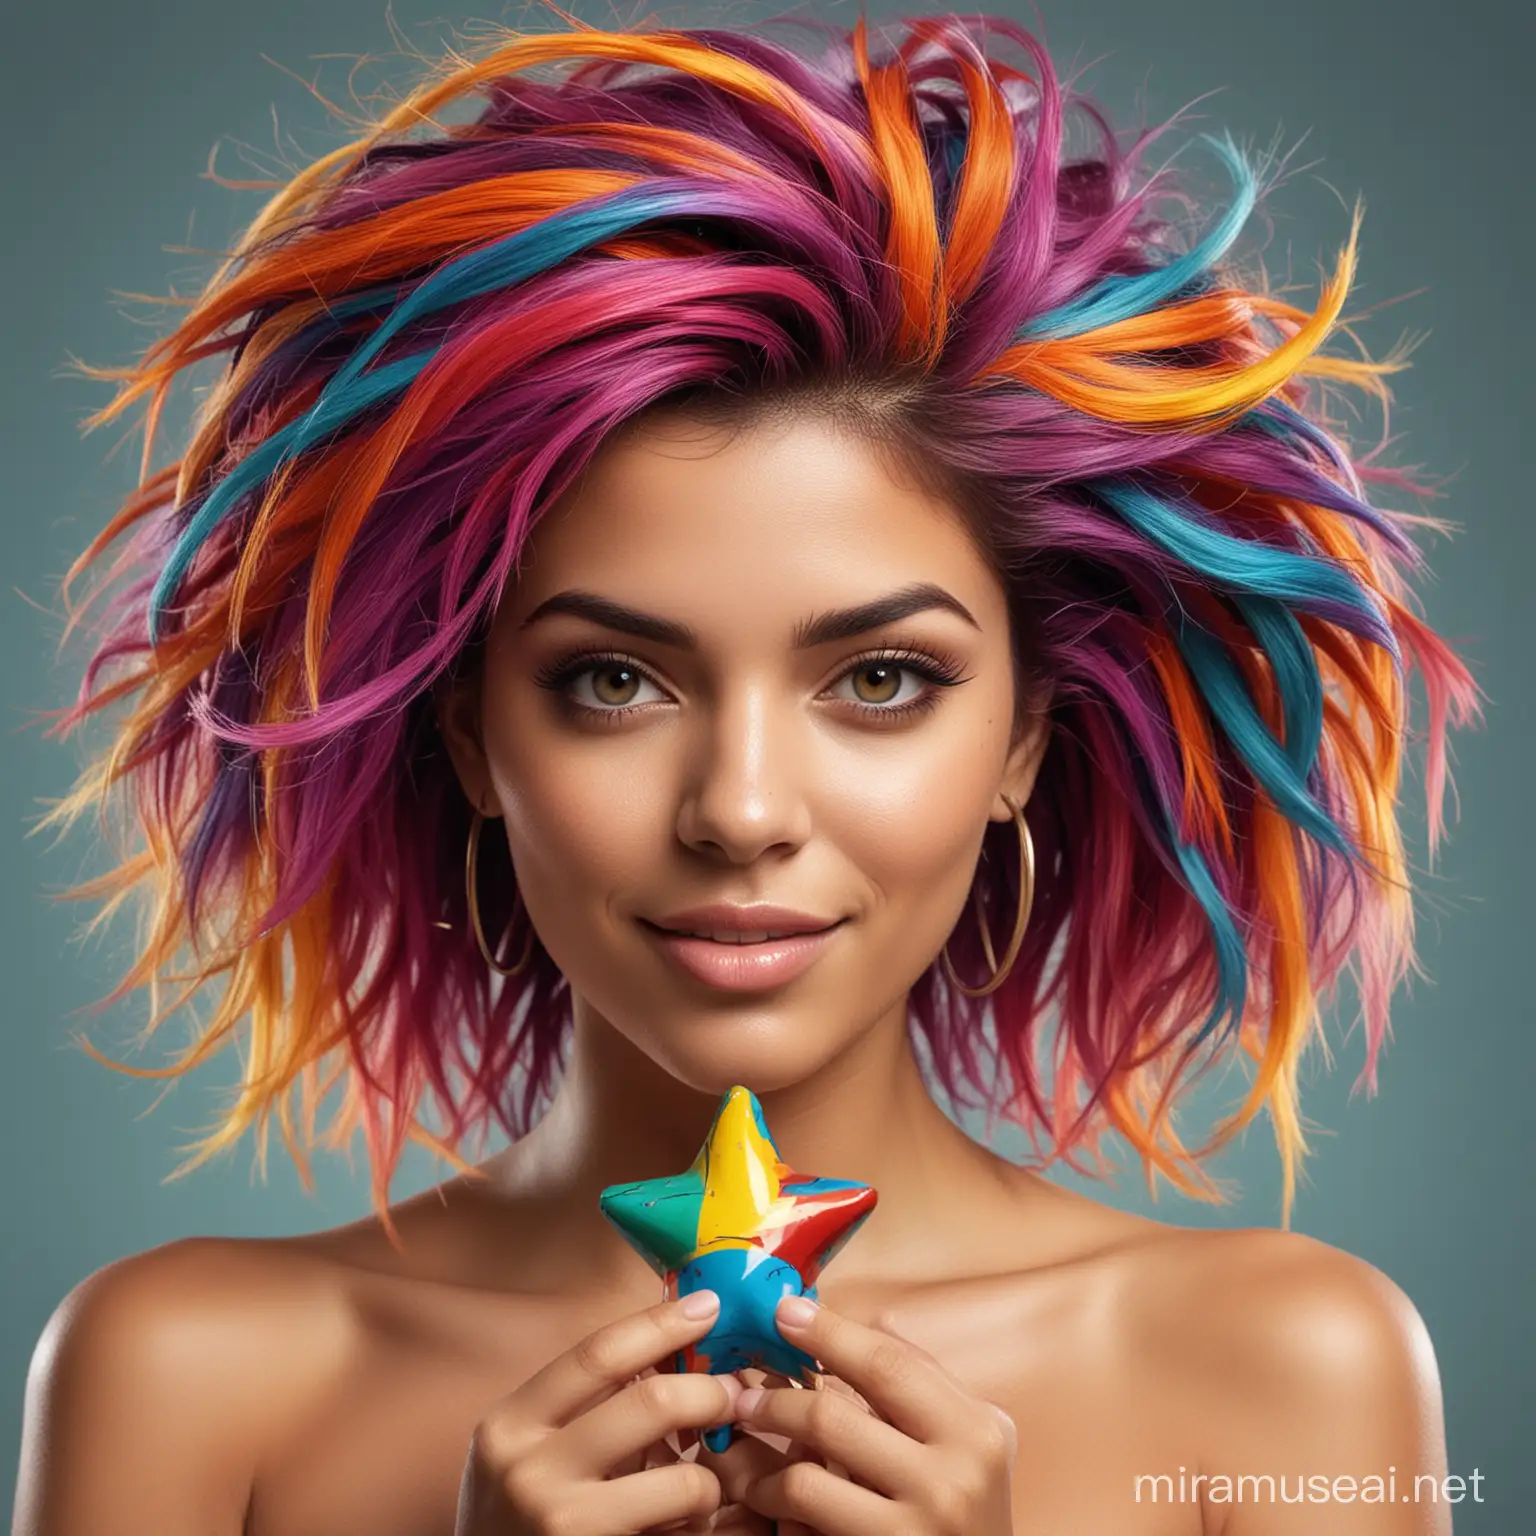 Confident Brazilian Woman with Colorful Hair and Whimsical Toy Amidst Empowering Elements